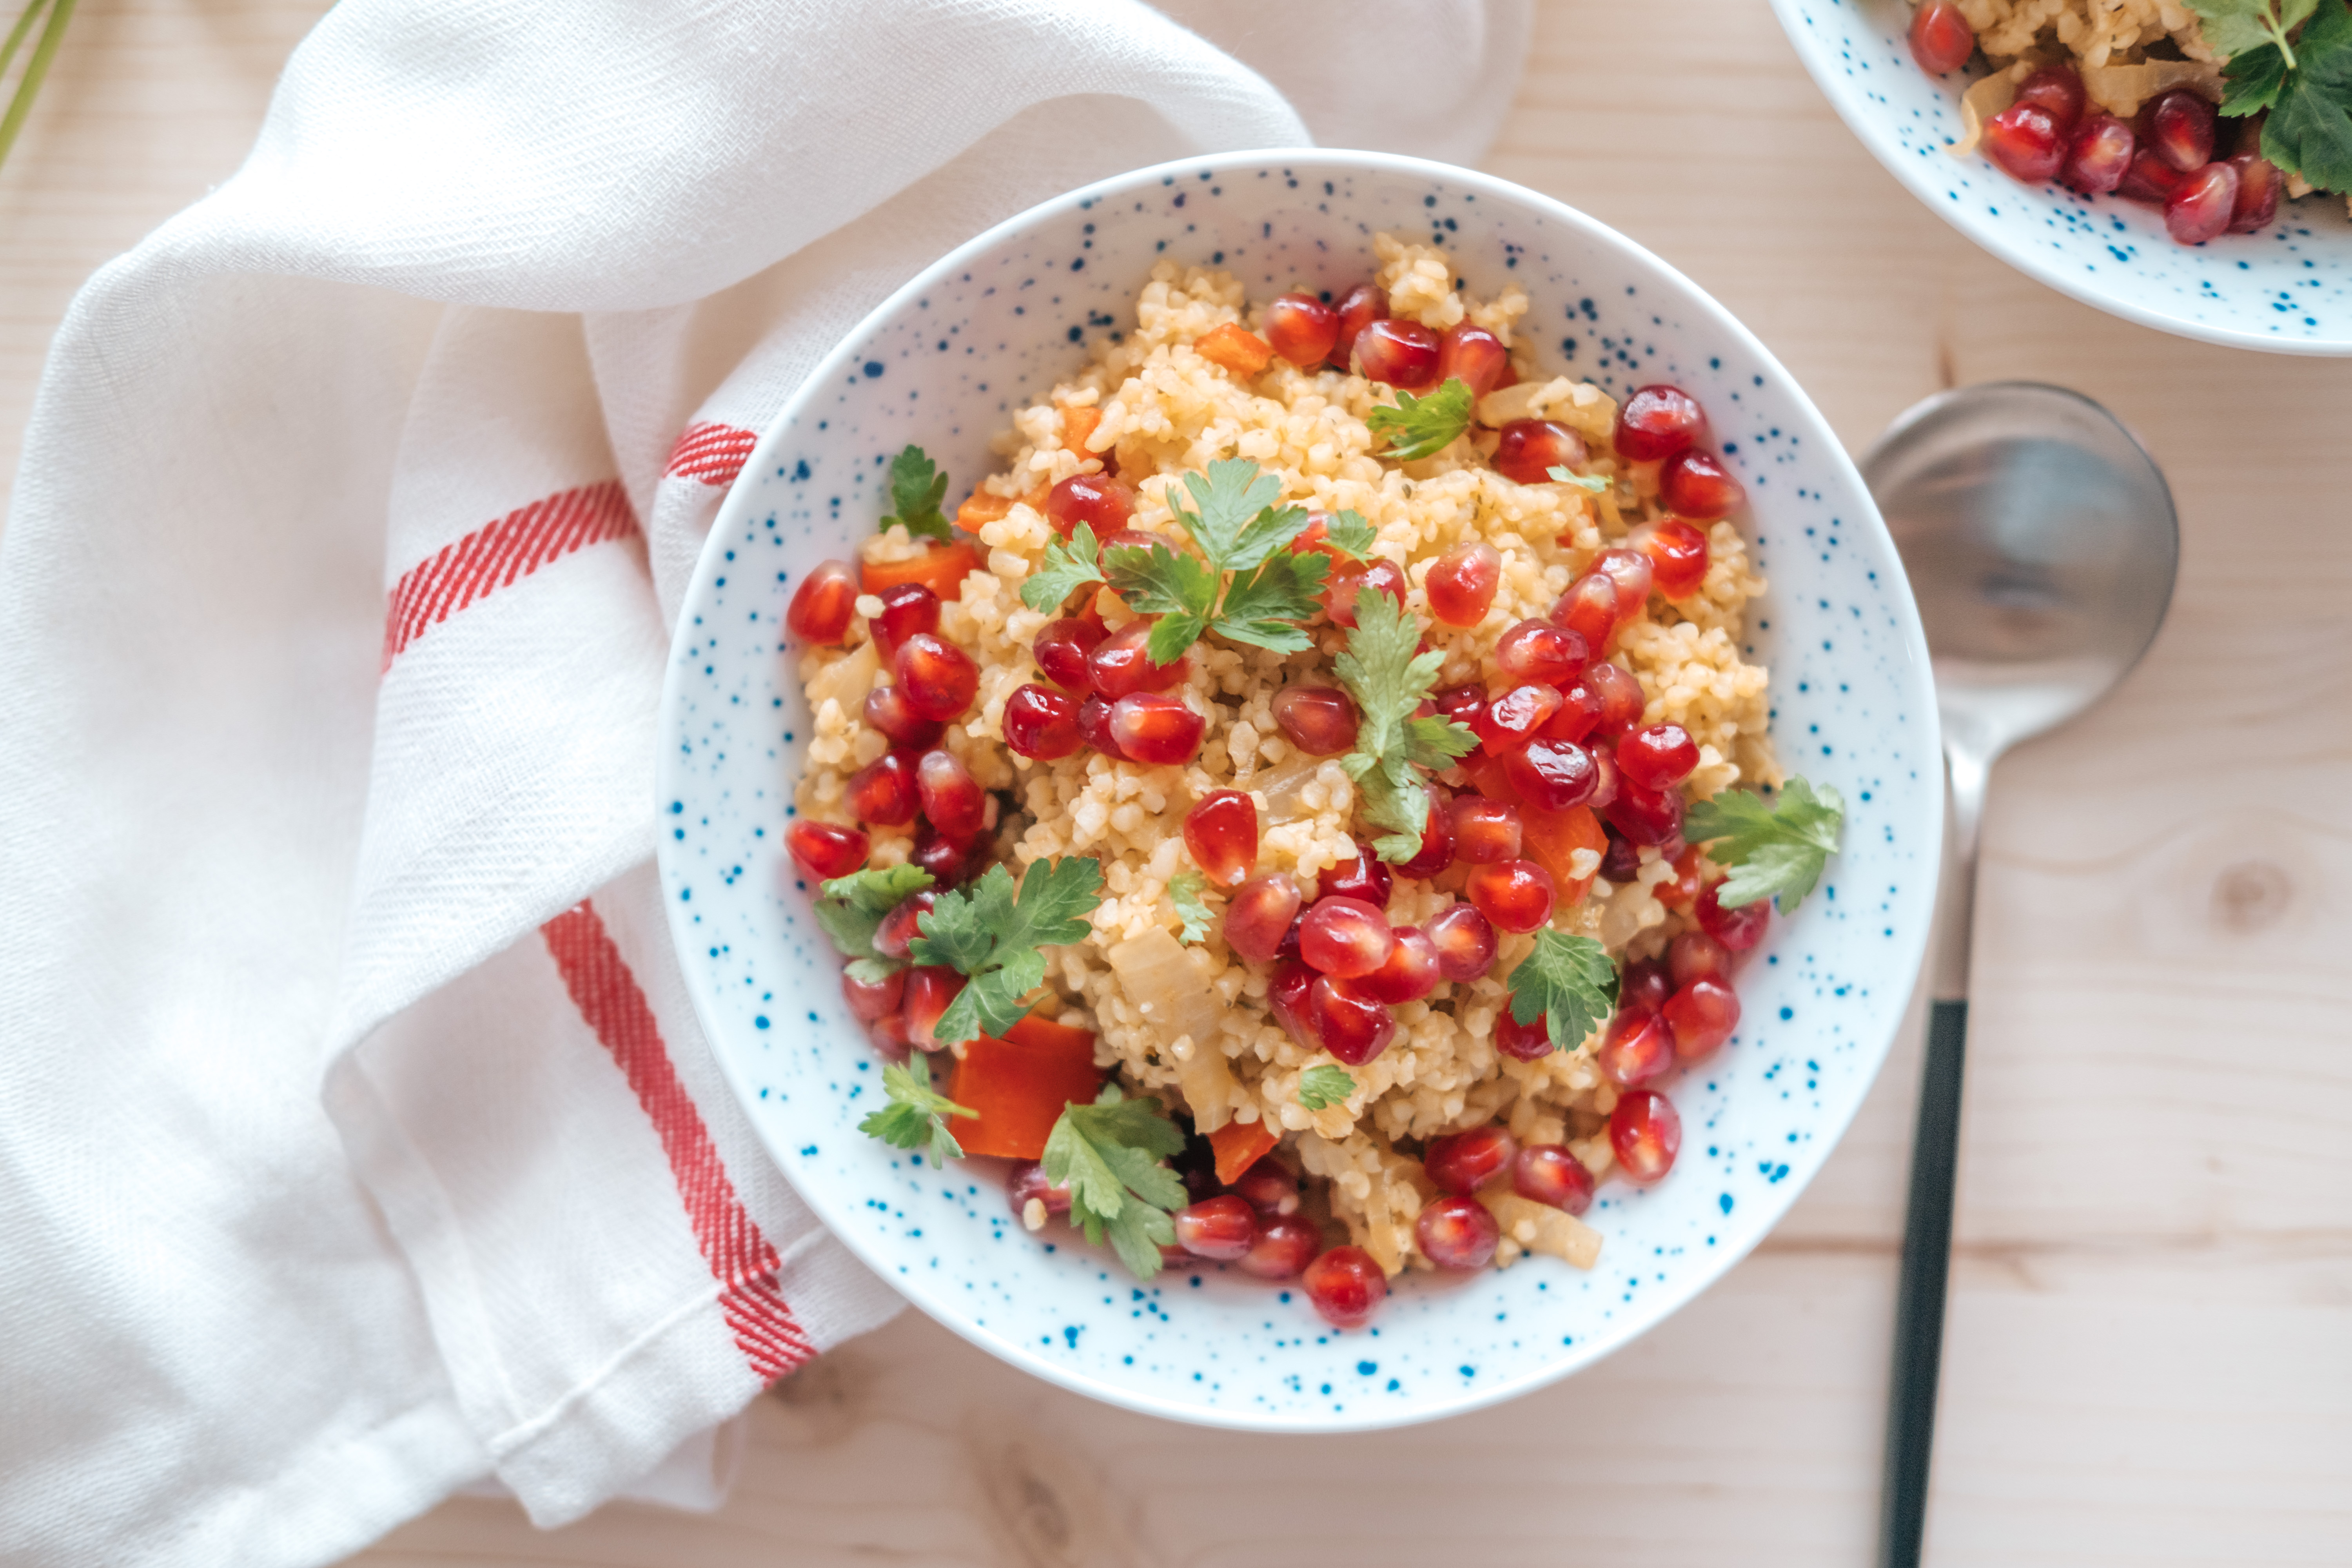 https://www.yuzubakes.com/sites/yuzubakes.com/files/featured-images/delicious-barley-salad-with-pomegranate-seeds.jpg